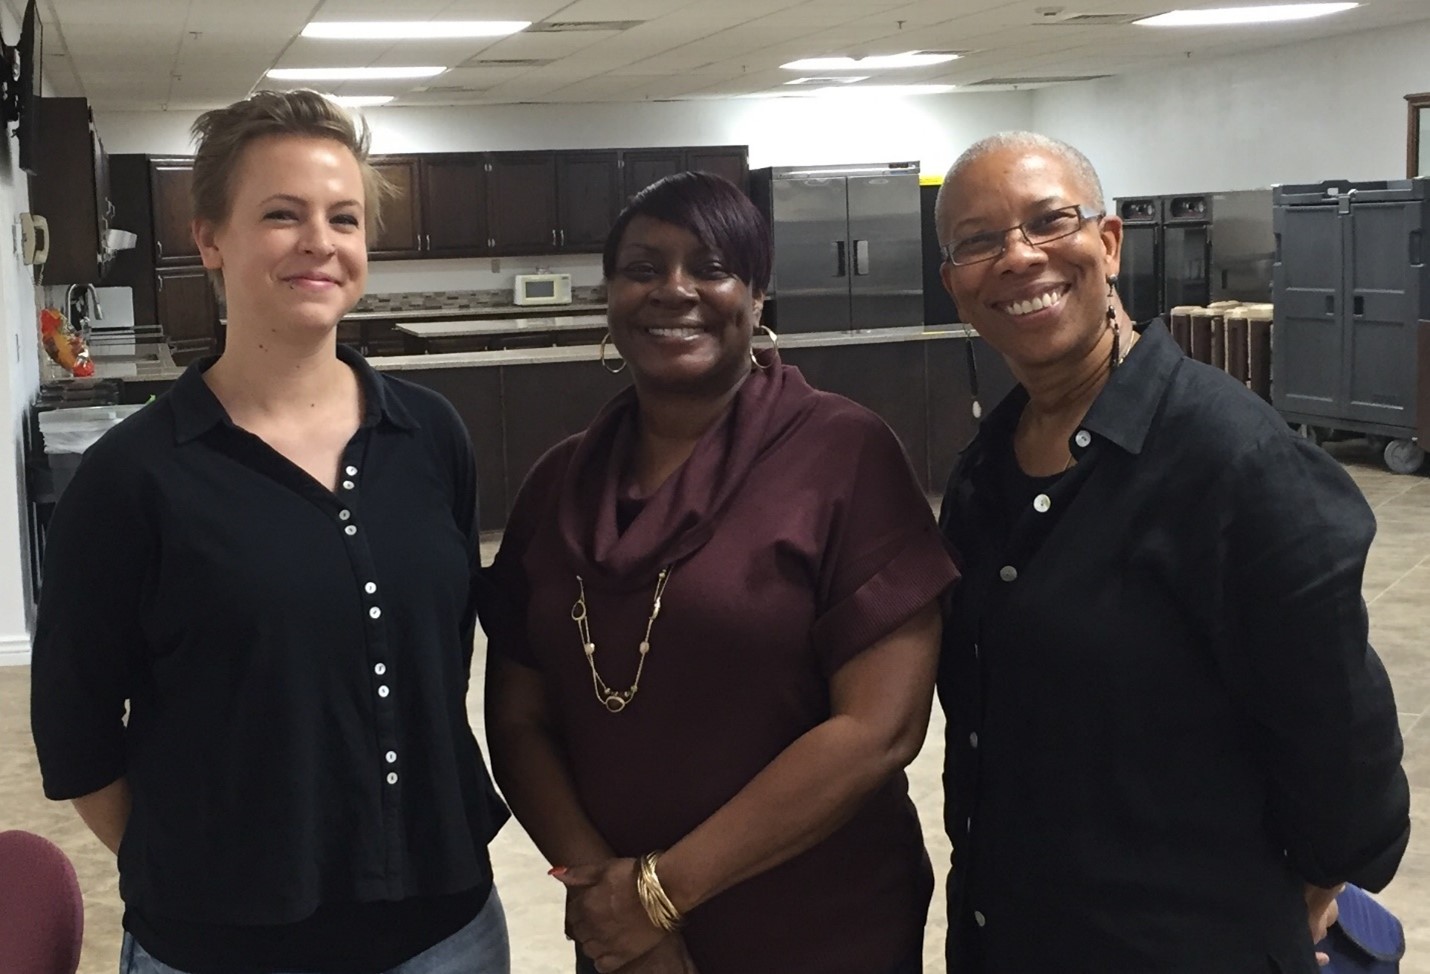 From left to right: Ms. Jessica Davenport, Long-term Volunteer and Donor; Ms. Sabrina L. Moore, Former Volunteer Coordinator; and Professor Crystal Griffith, Current Volunteer.